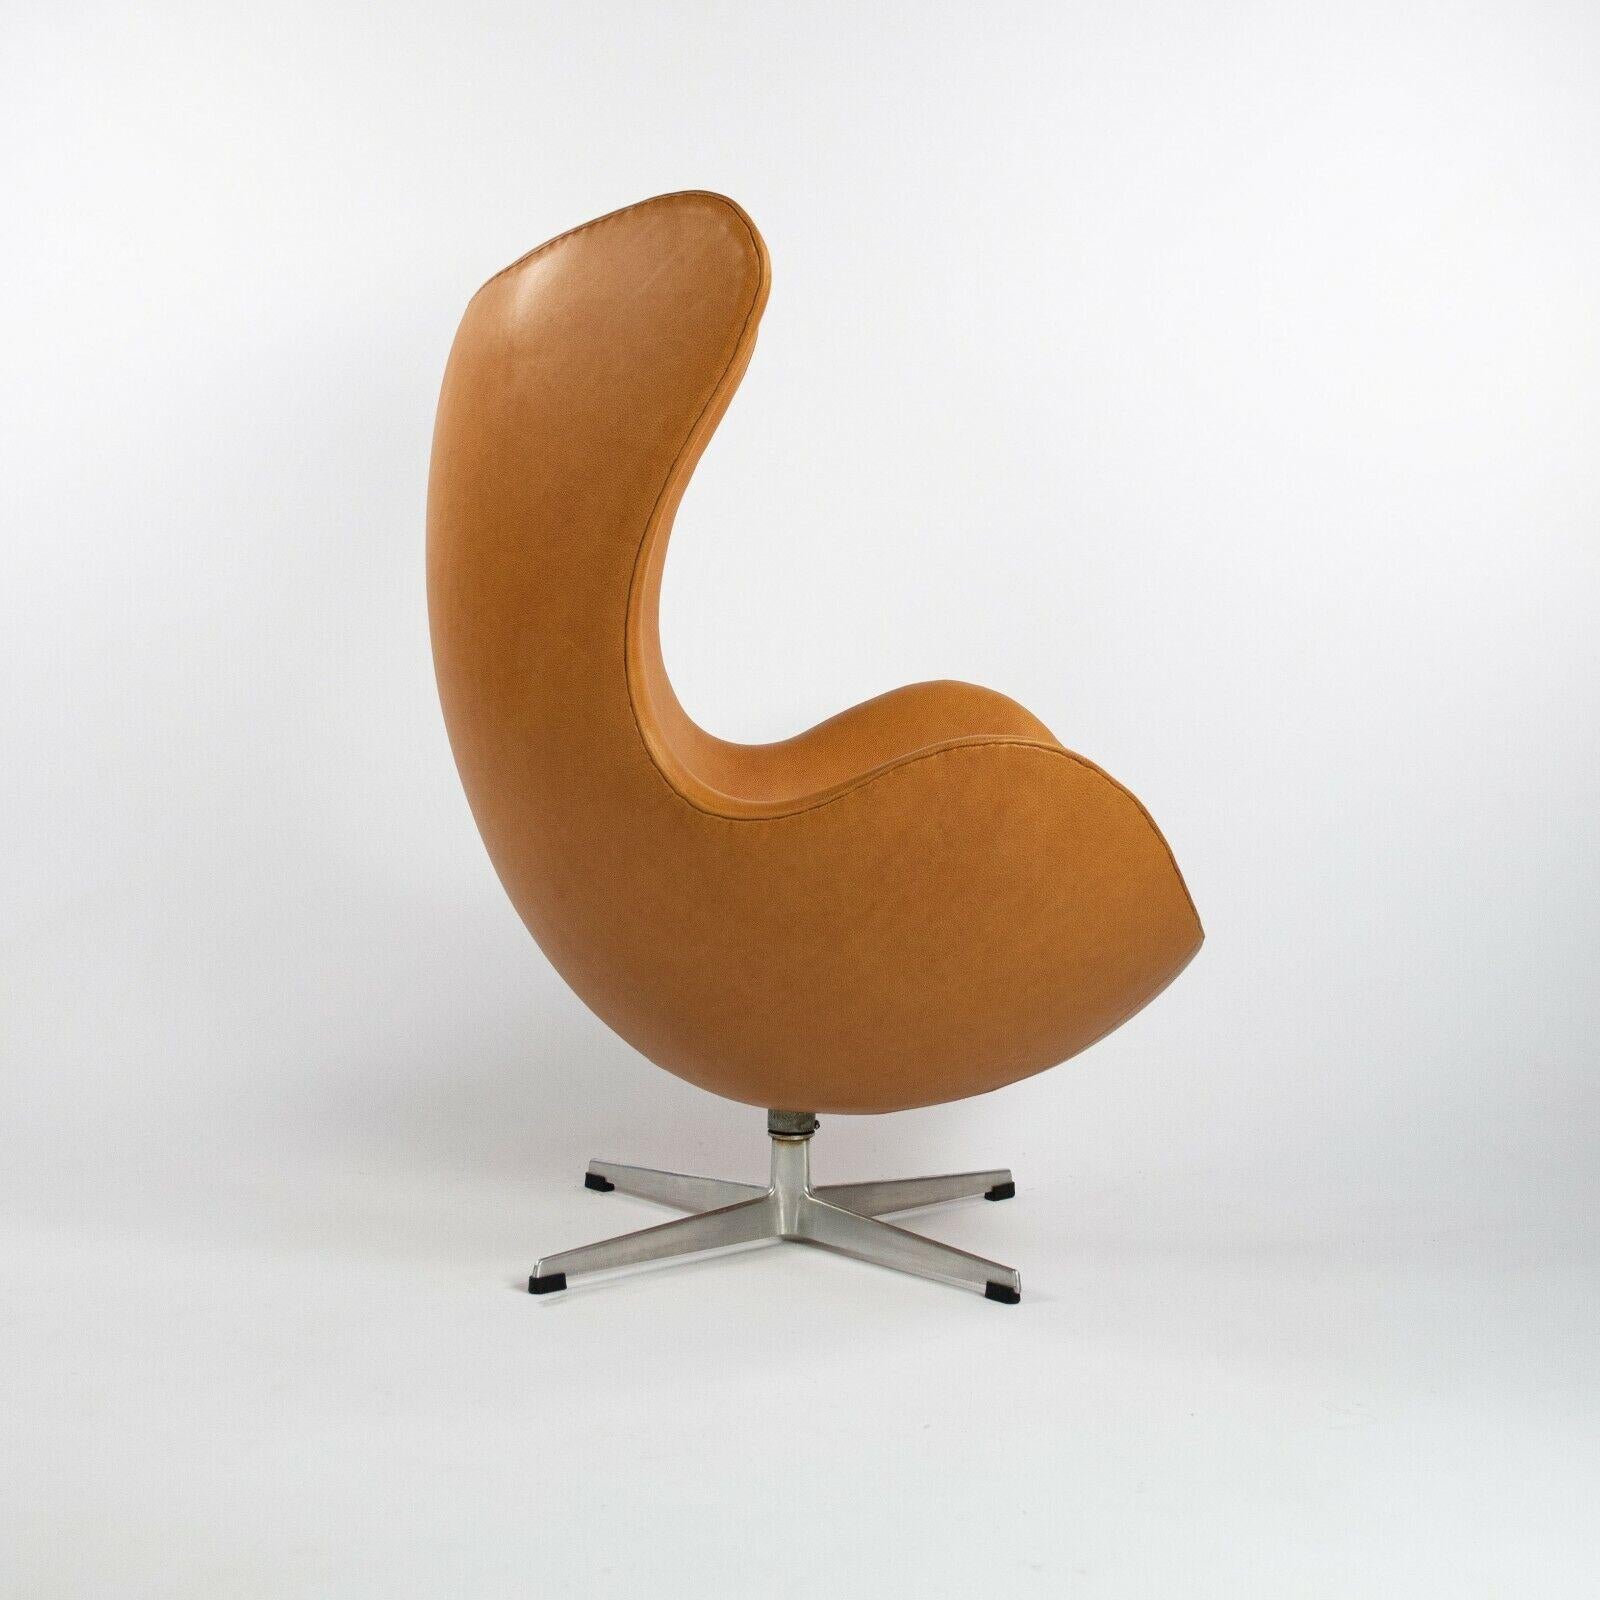 1959 Arne Jacobsen for Fritz Hansen Egg Chair & Ottoman in Tan / Cognac Leather In Good Condition For Sale In Philadelphia, PA